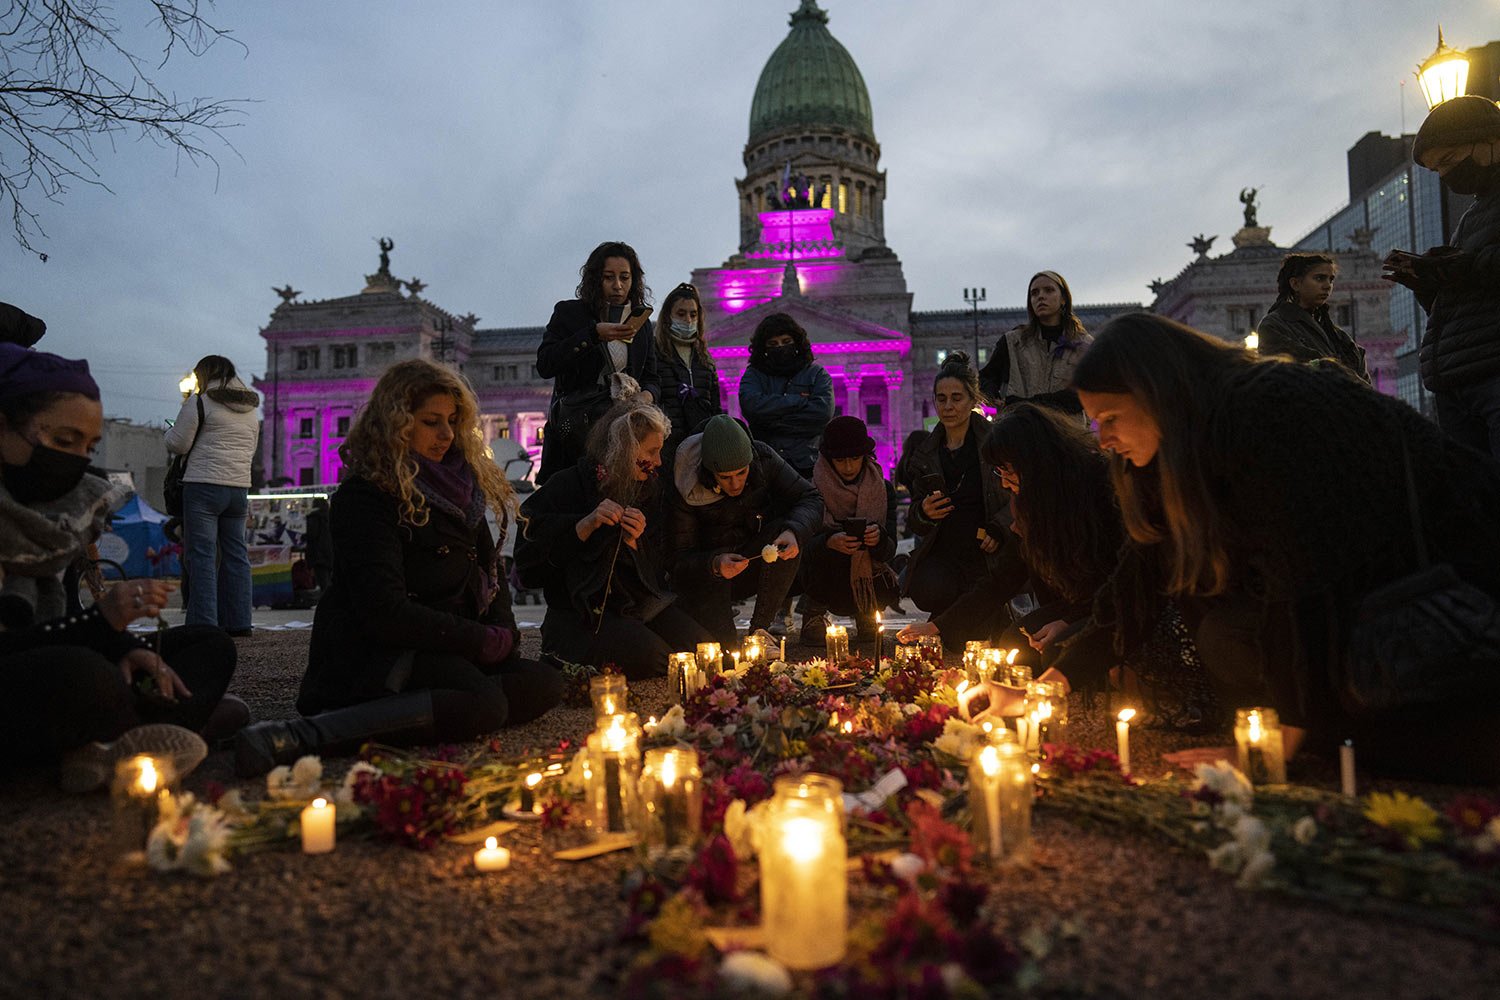  Women light candles during a march marking the 7th anniversary of the Ni Una Menos, or Not One Less, women's movement, in Buenos Aires, Argentina, Friday, June 3, 2022. (AP Photo/Rodrigo Abd) 